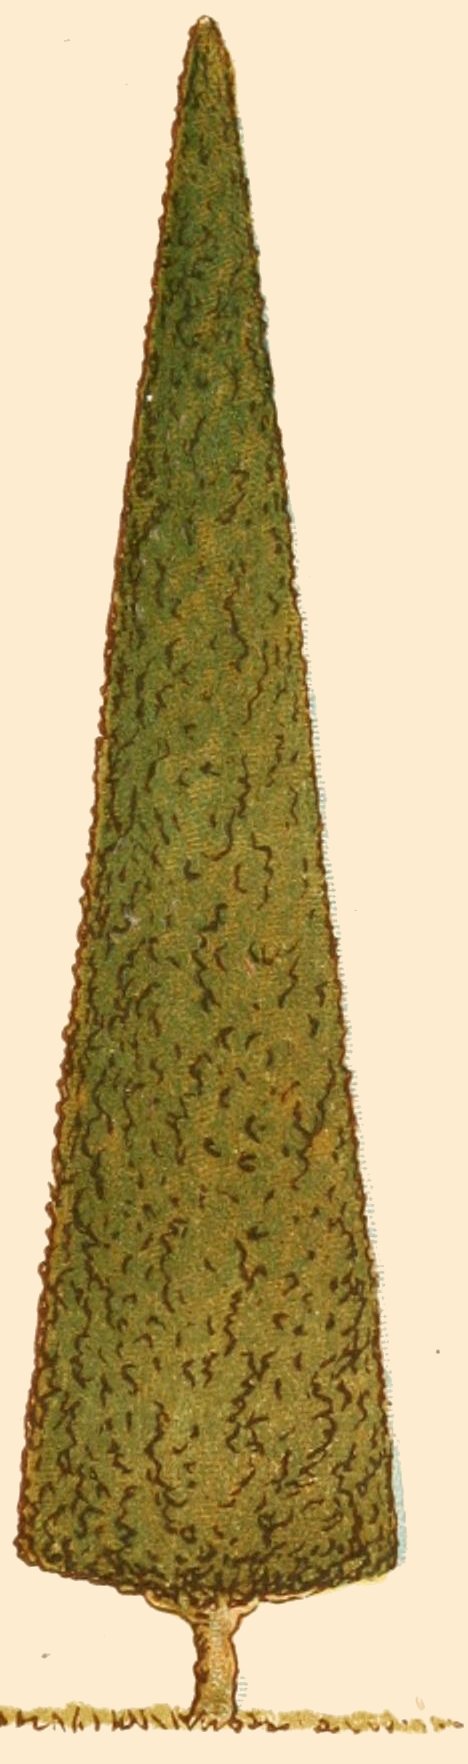 victorian drawing of a conifer tree